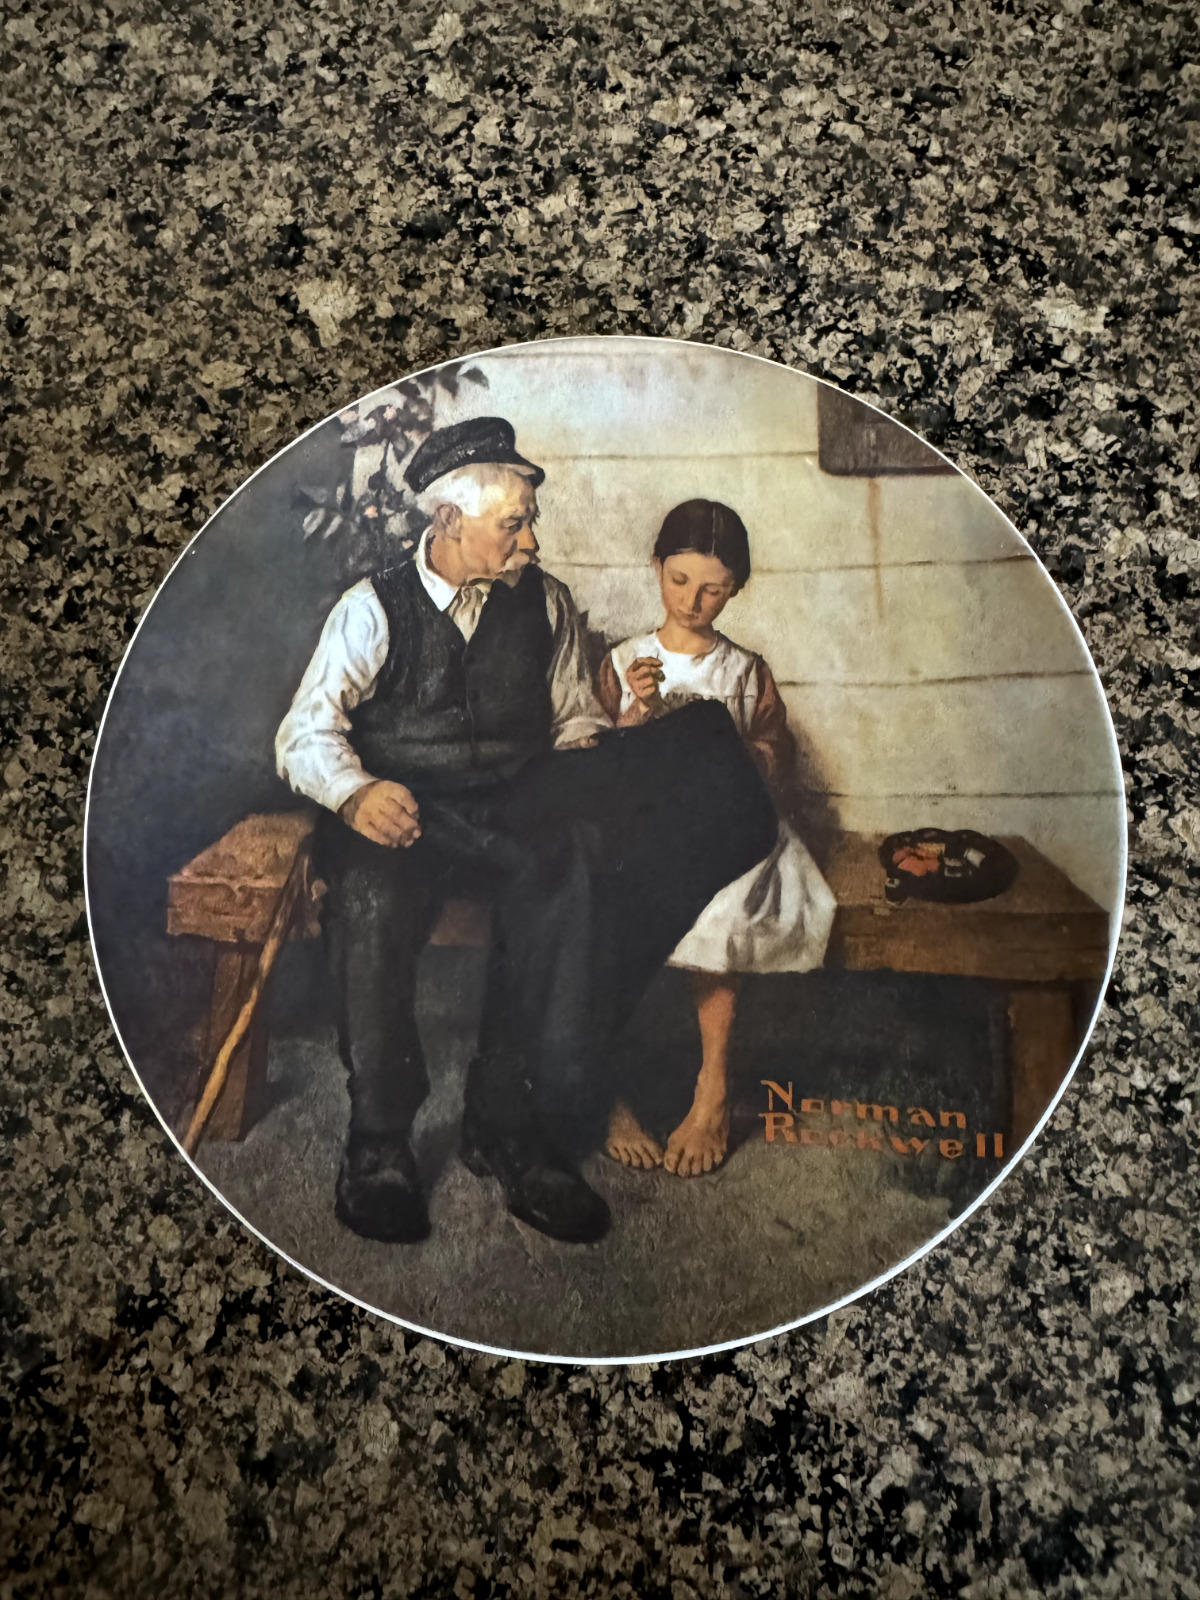  Knowles Norman Rockwell Plate (1979) \